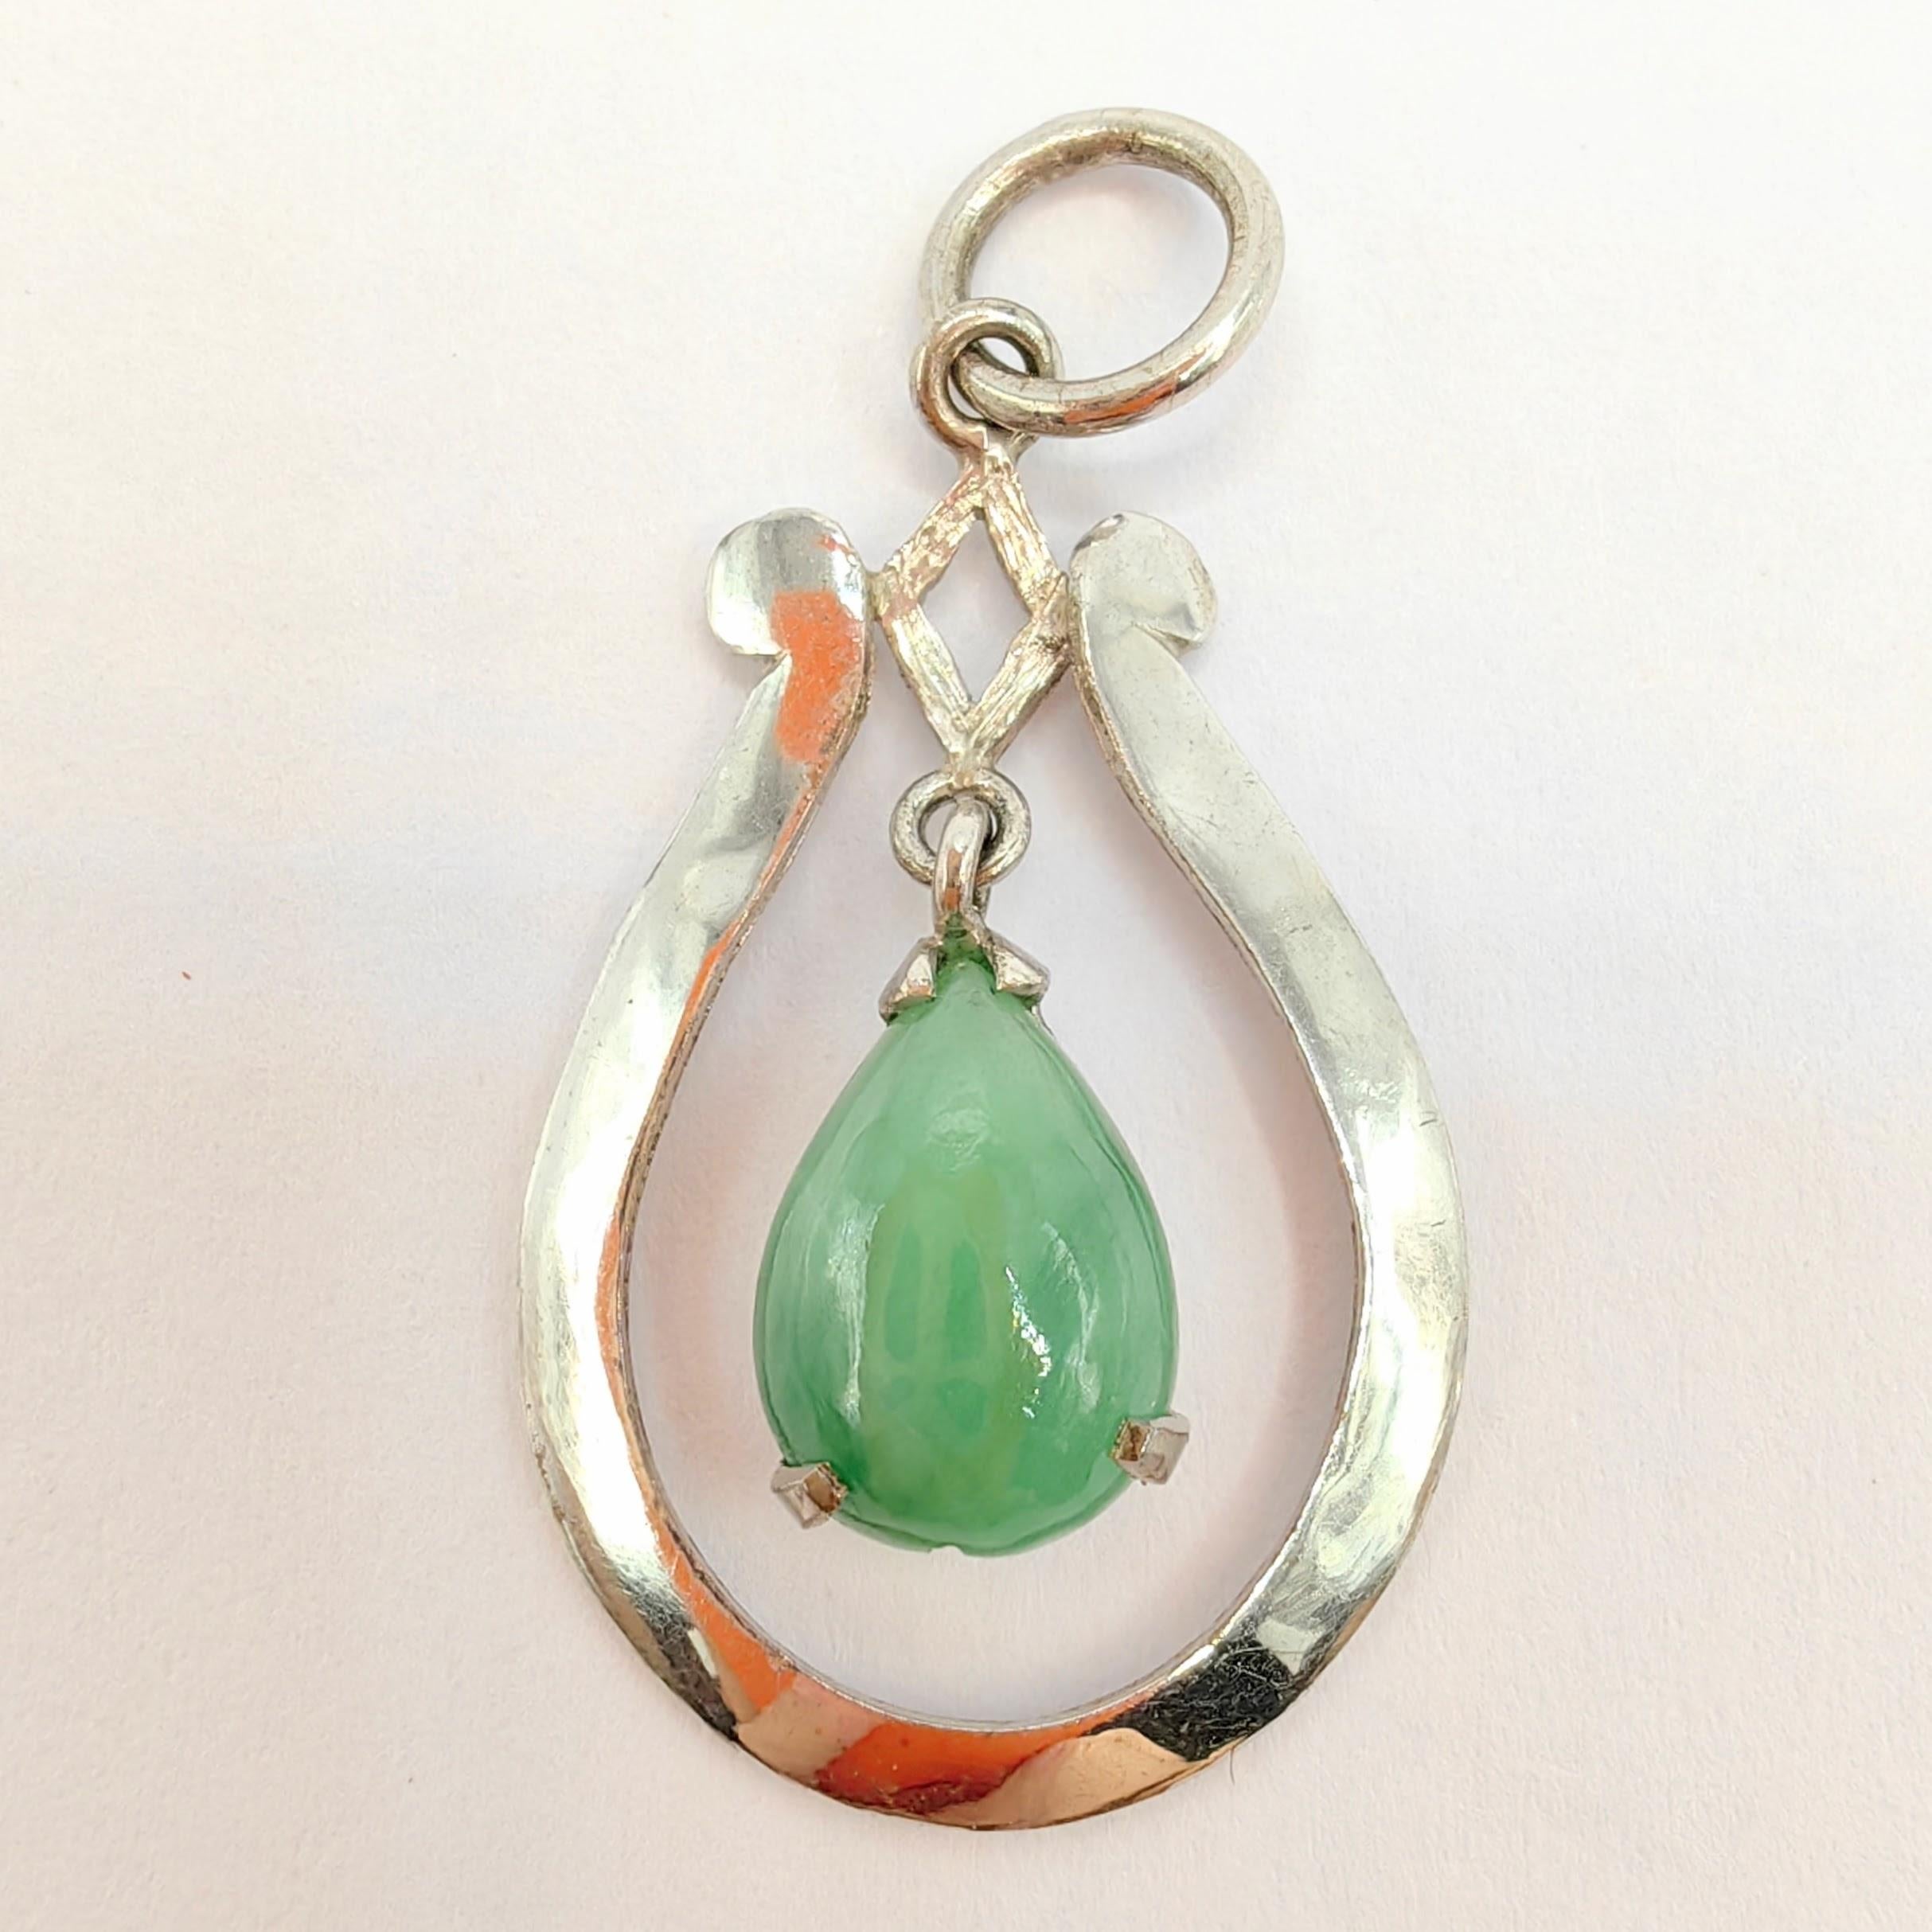 Introducing our Vintage Pear Shaped Teardrop Jade Pendant in Sterling Silver, a truly captivating piece that effortlessly combines the natural allure of jade with the timeless elegance of sterling silver.

At the heart of this pendant lies a